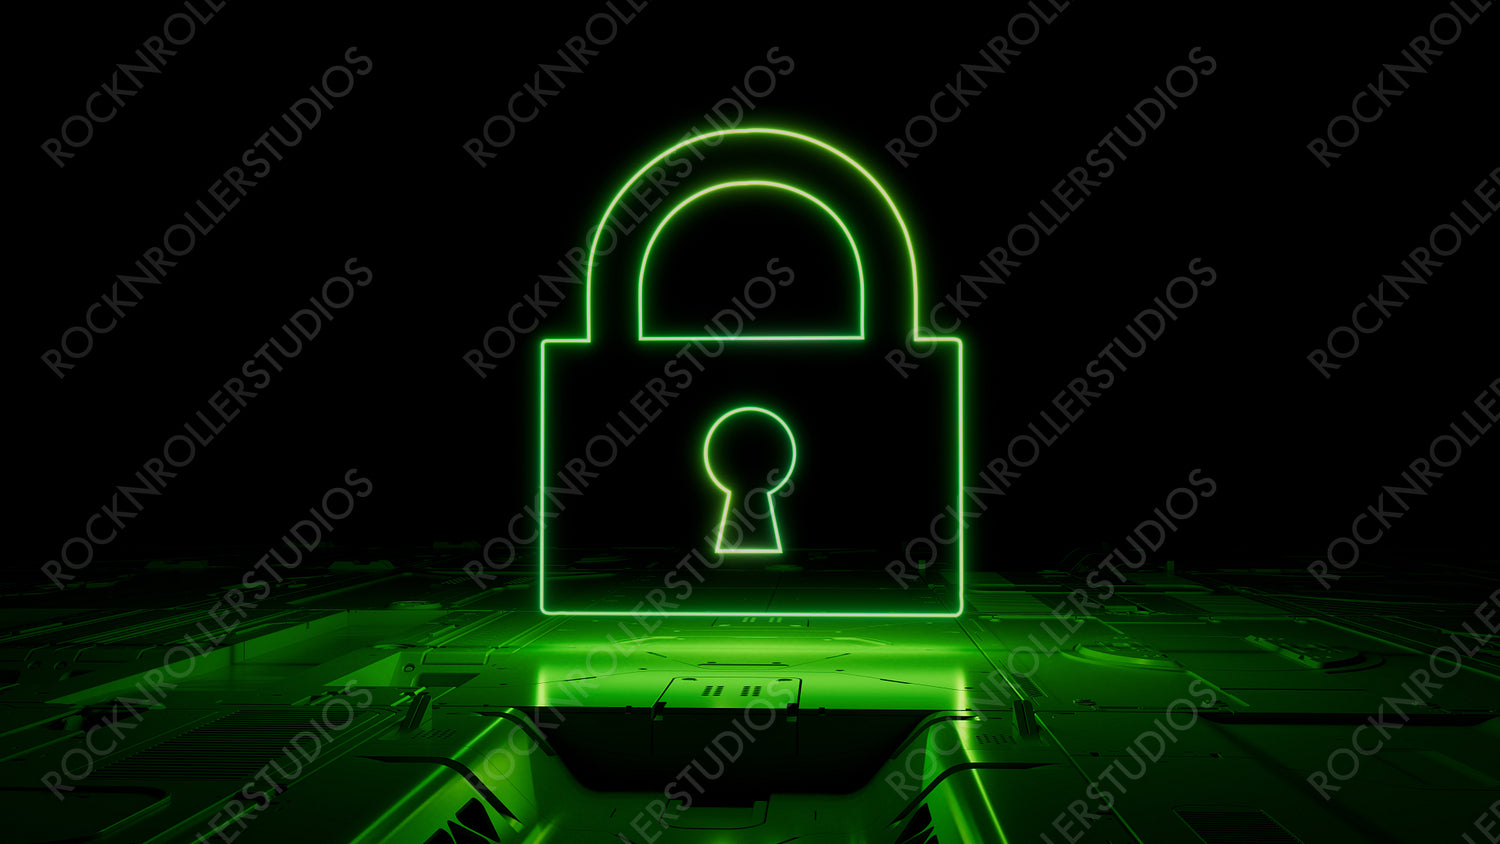 Green Security Technology Concept with lock symbol as a neon light. Vibrant colored icon, on a black background with high tech floor. 3D Render